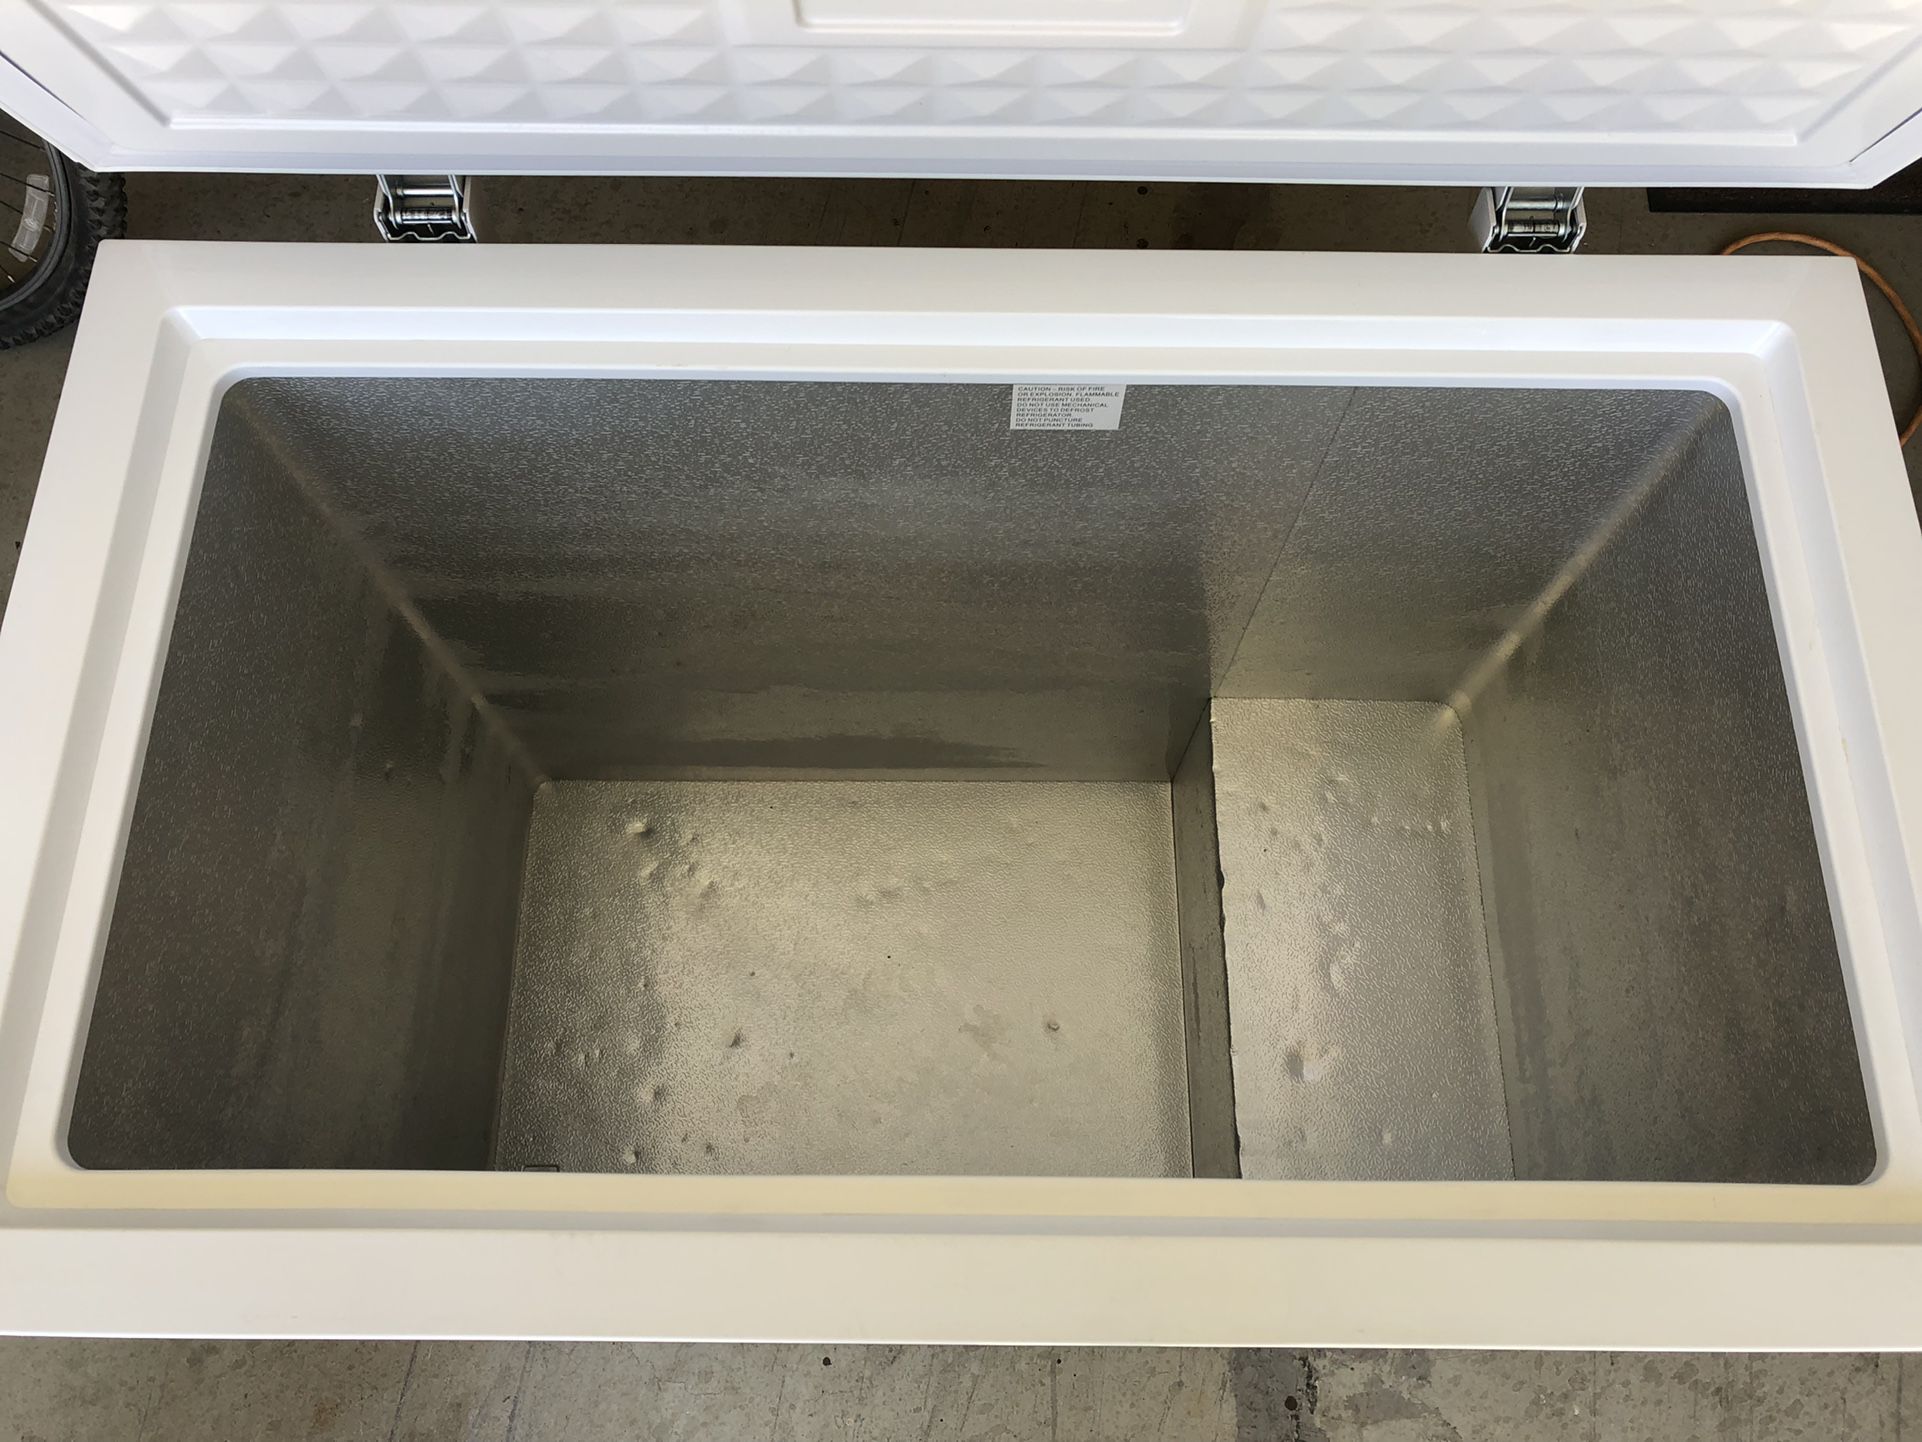 Criterion 7.0 - 7.2 cu. ft. White Manual Defrost Chest Freezer for Sale in  Lynwood, CA - OfferUp